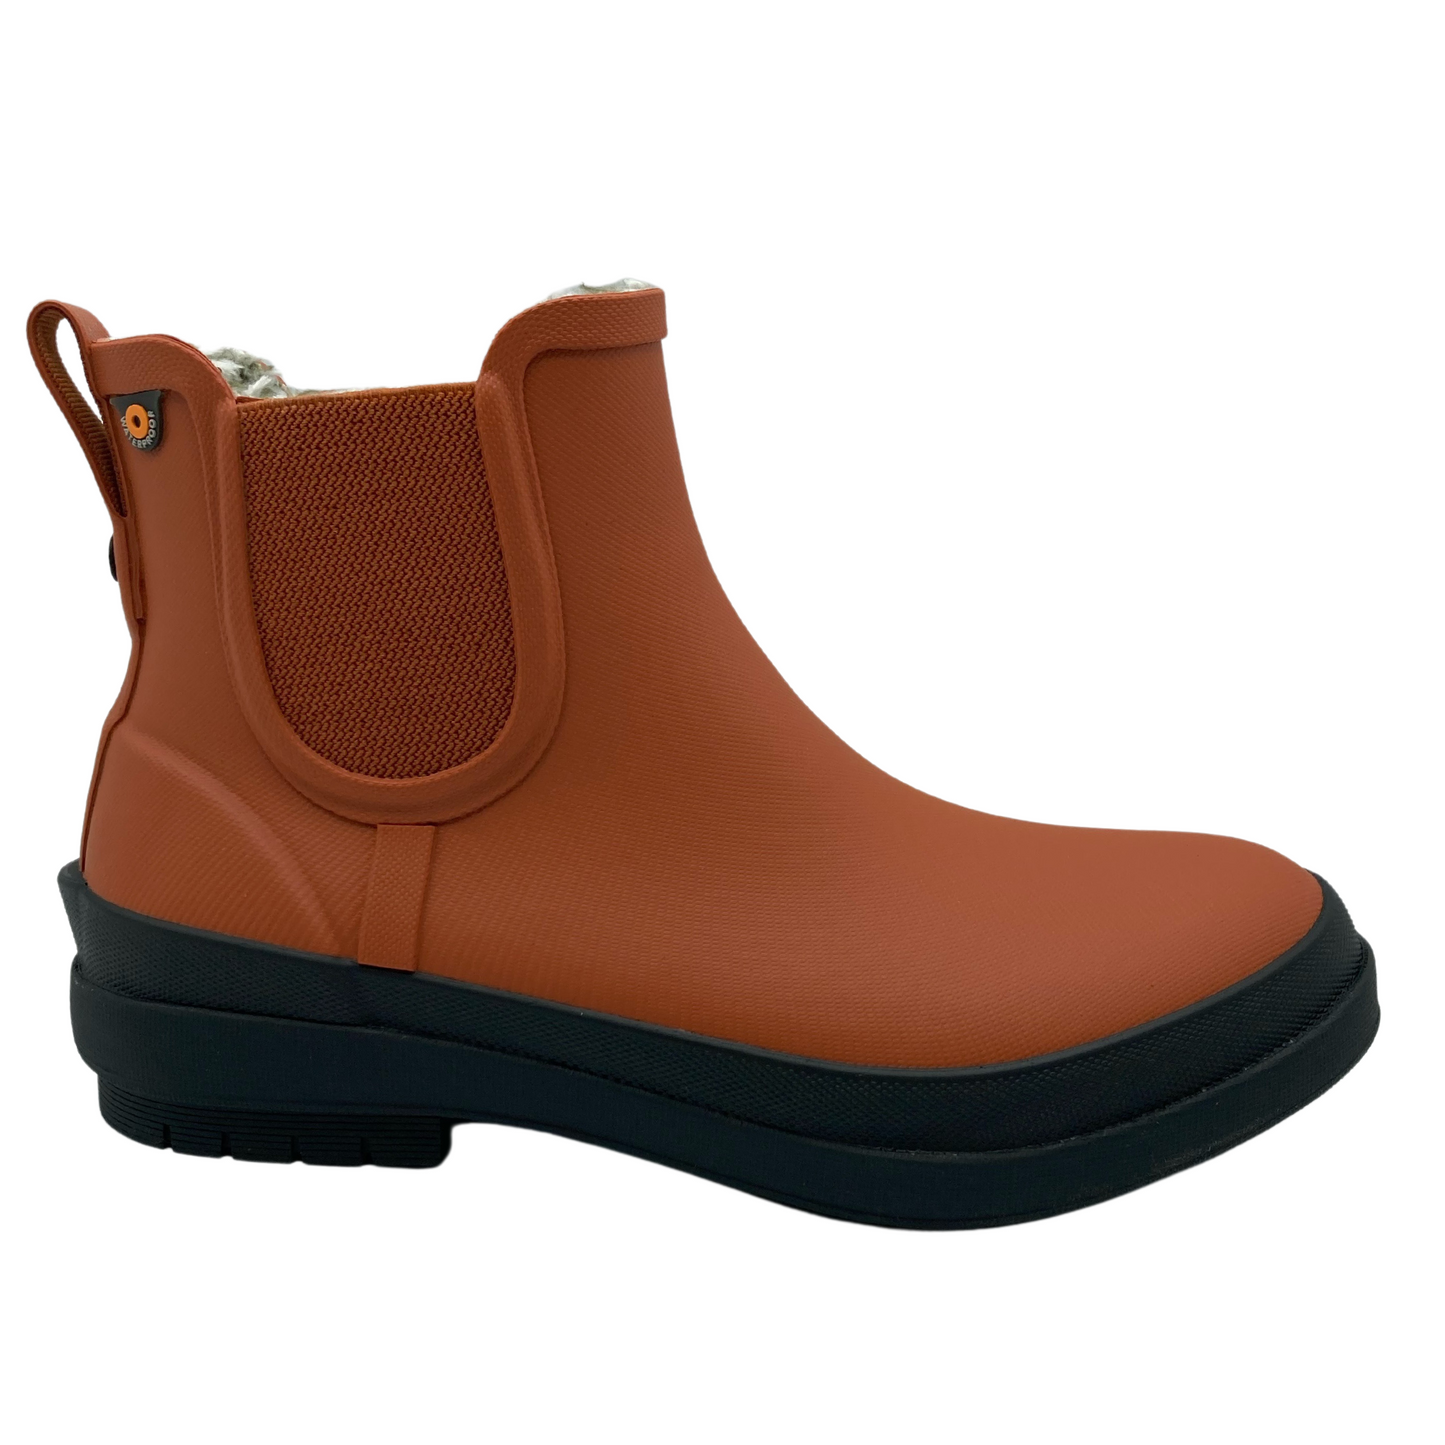 Right facing view of burnt orange short rain boot with elastic side gores and black rubber outsole